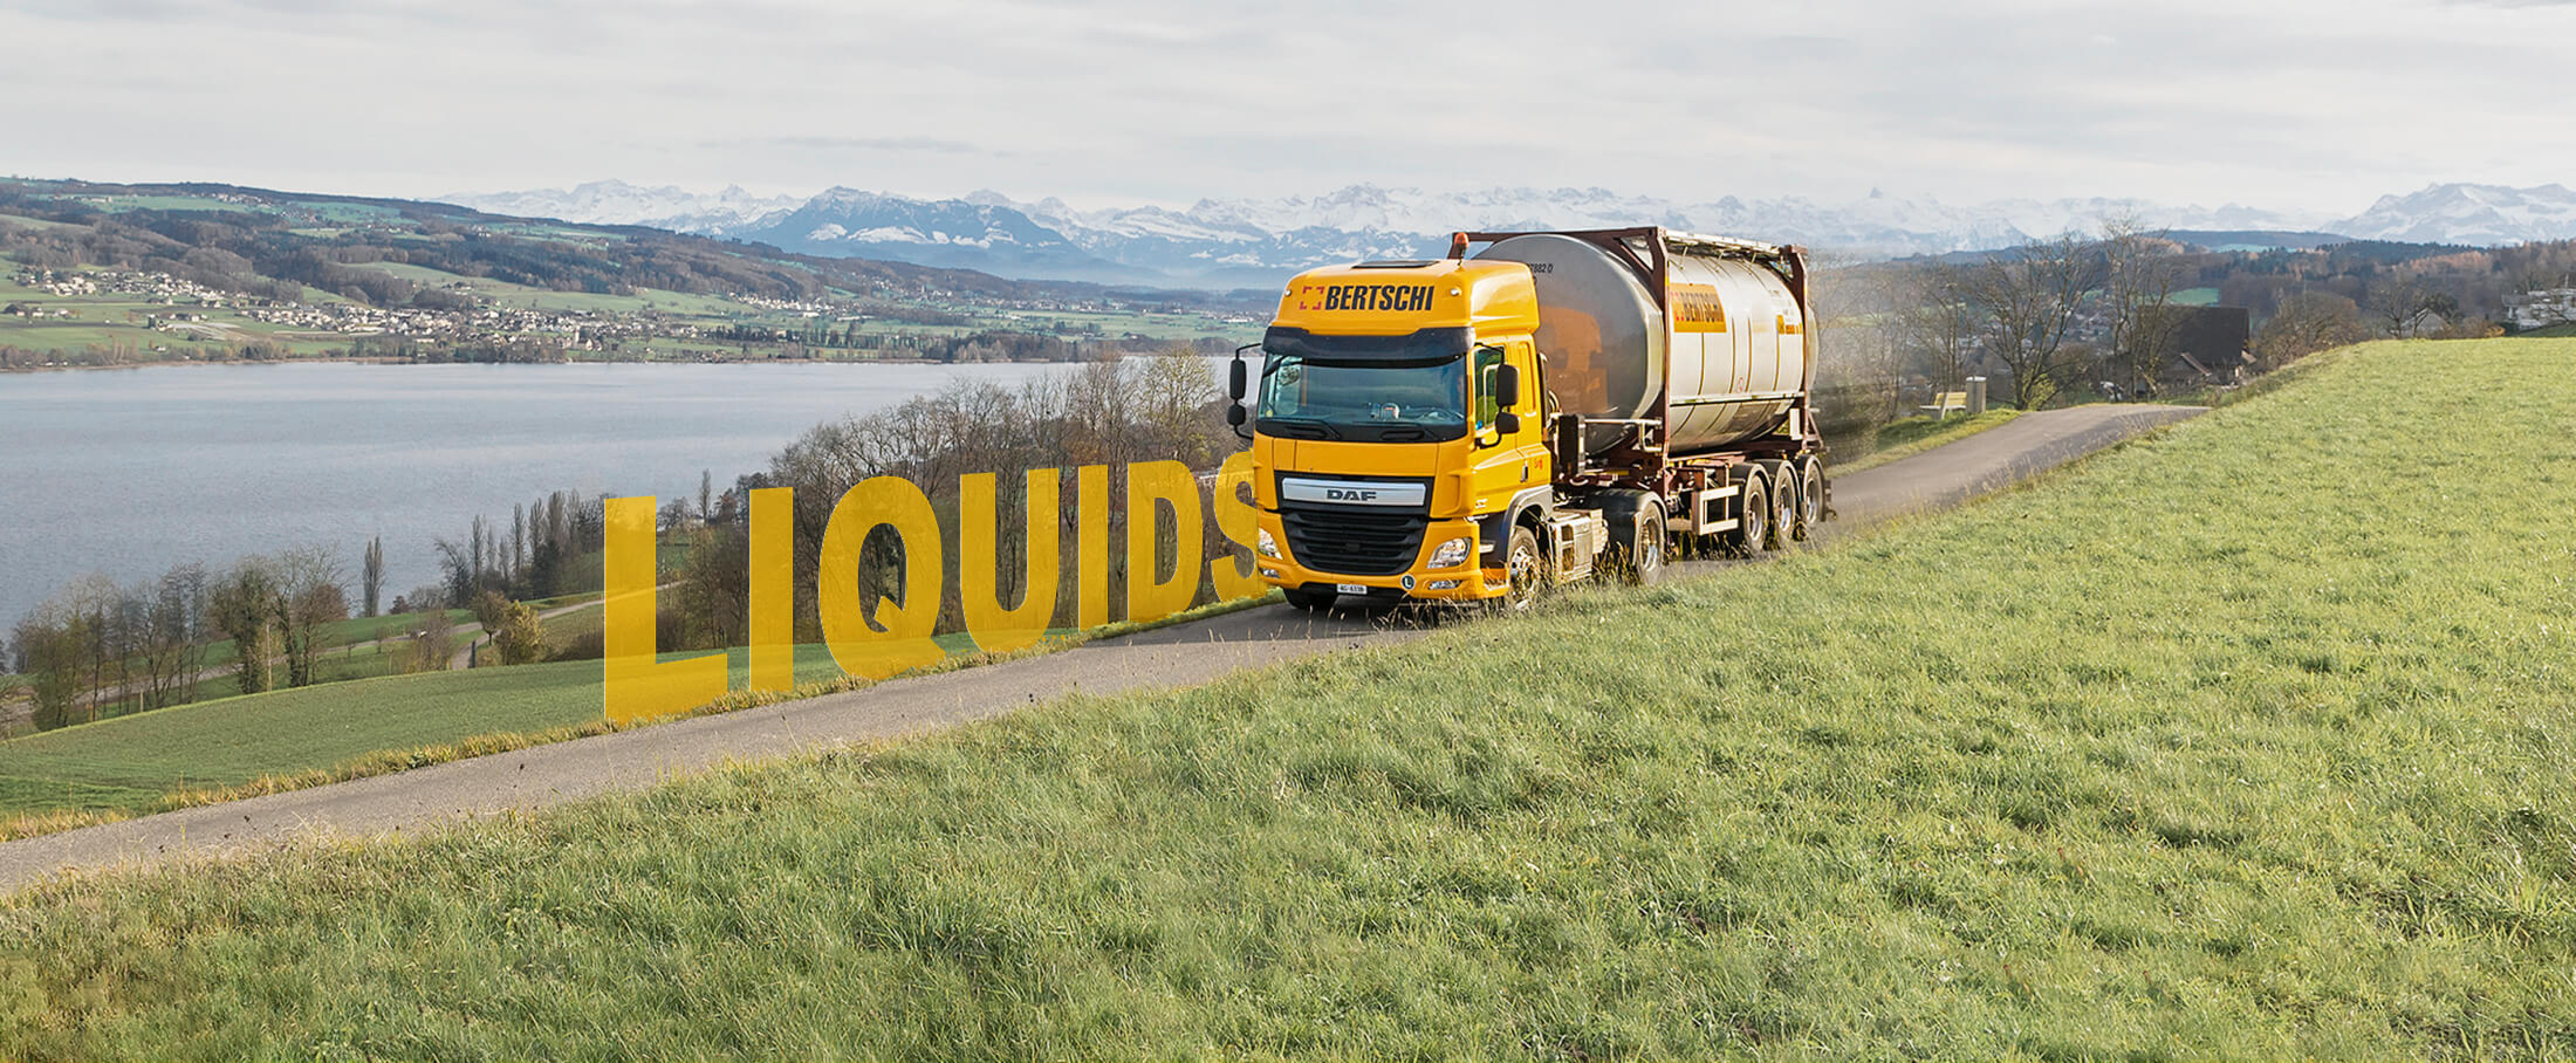 A Bertschi truck carrying a liquid container driving over a country road